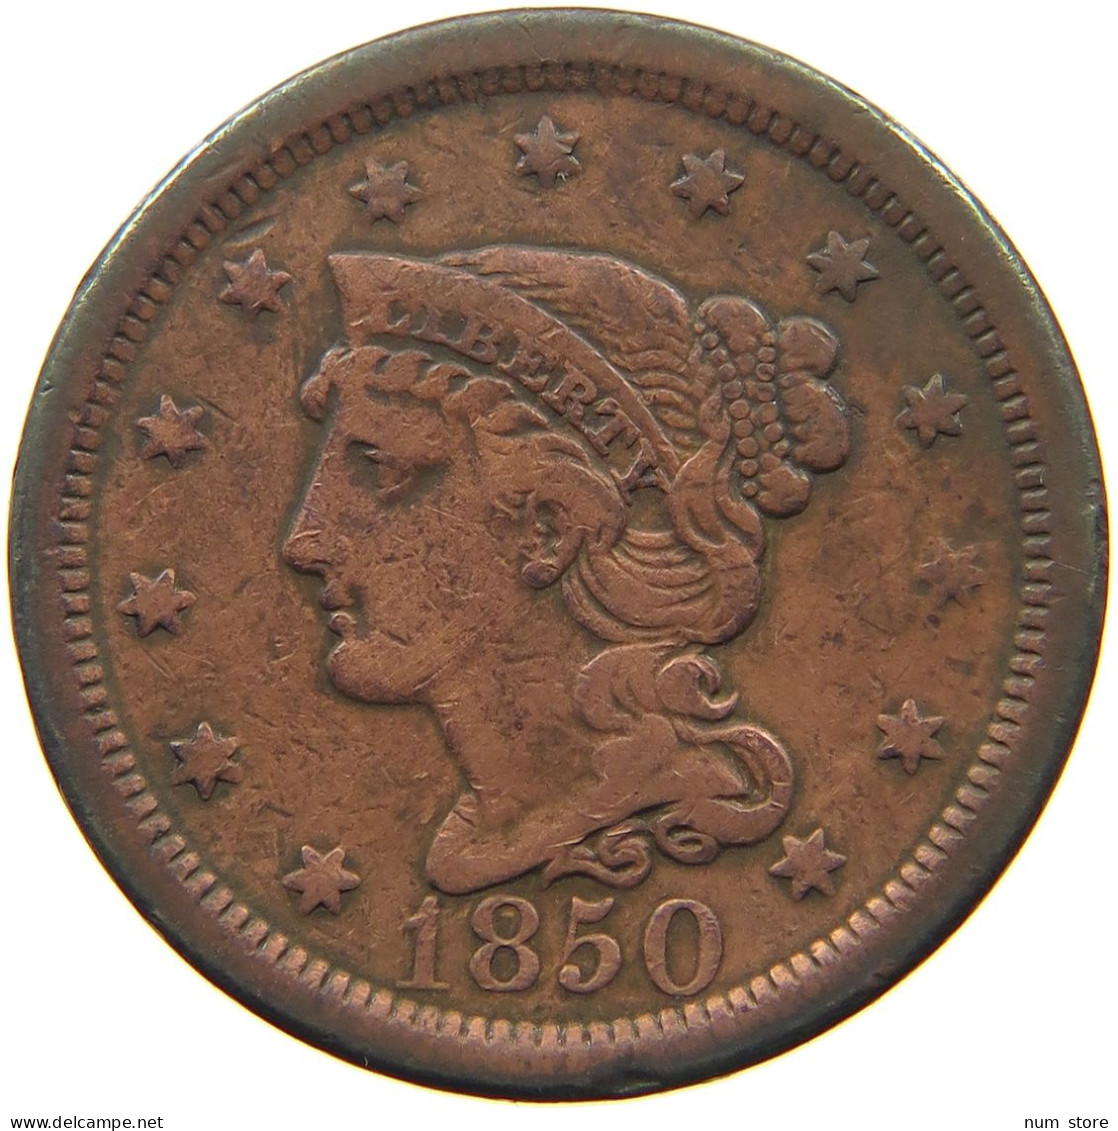 UNITED STATES OF AMERICA LARGE CENT 1850 BRAIDED HAIR #t141 0253 - 1840-1857: Braided Hair